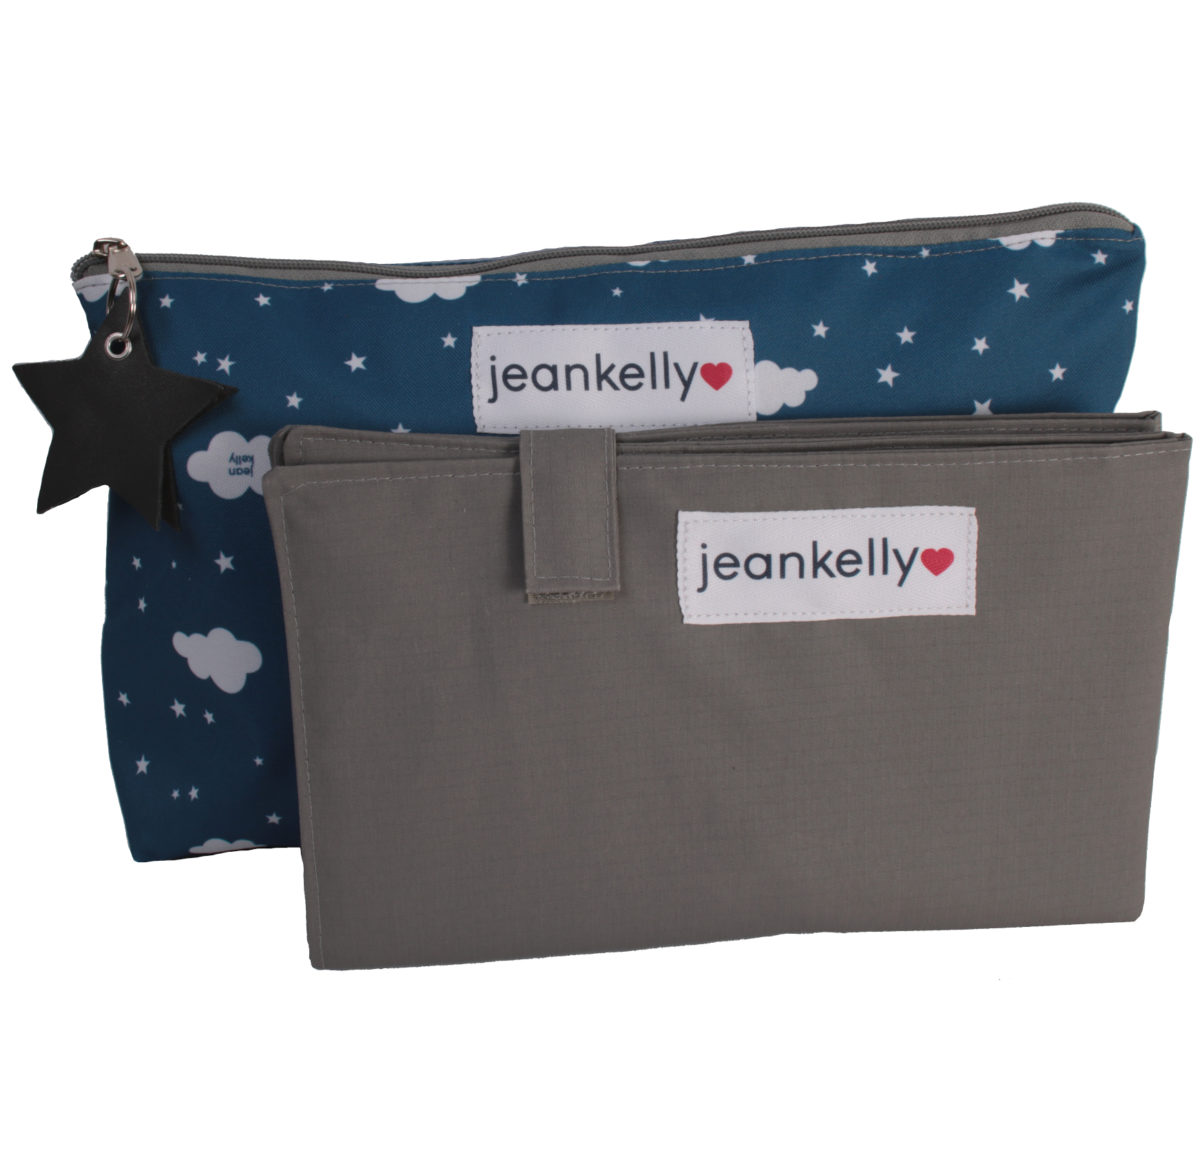 jeankelly_pouch navy and grey